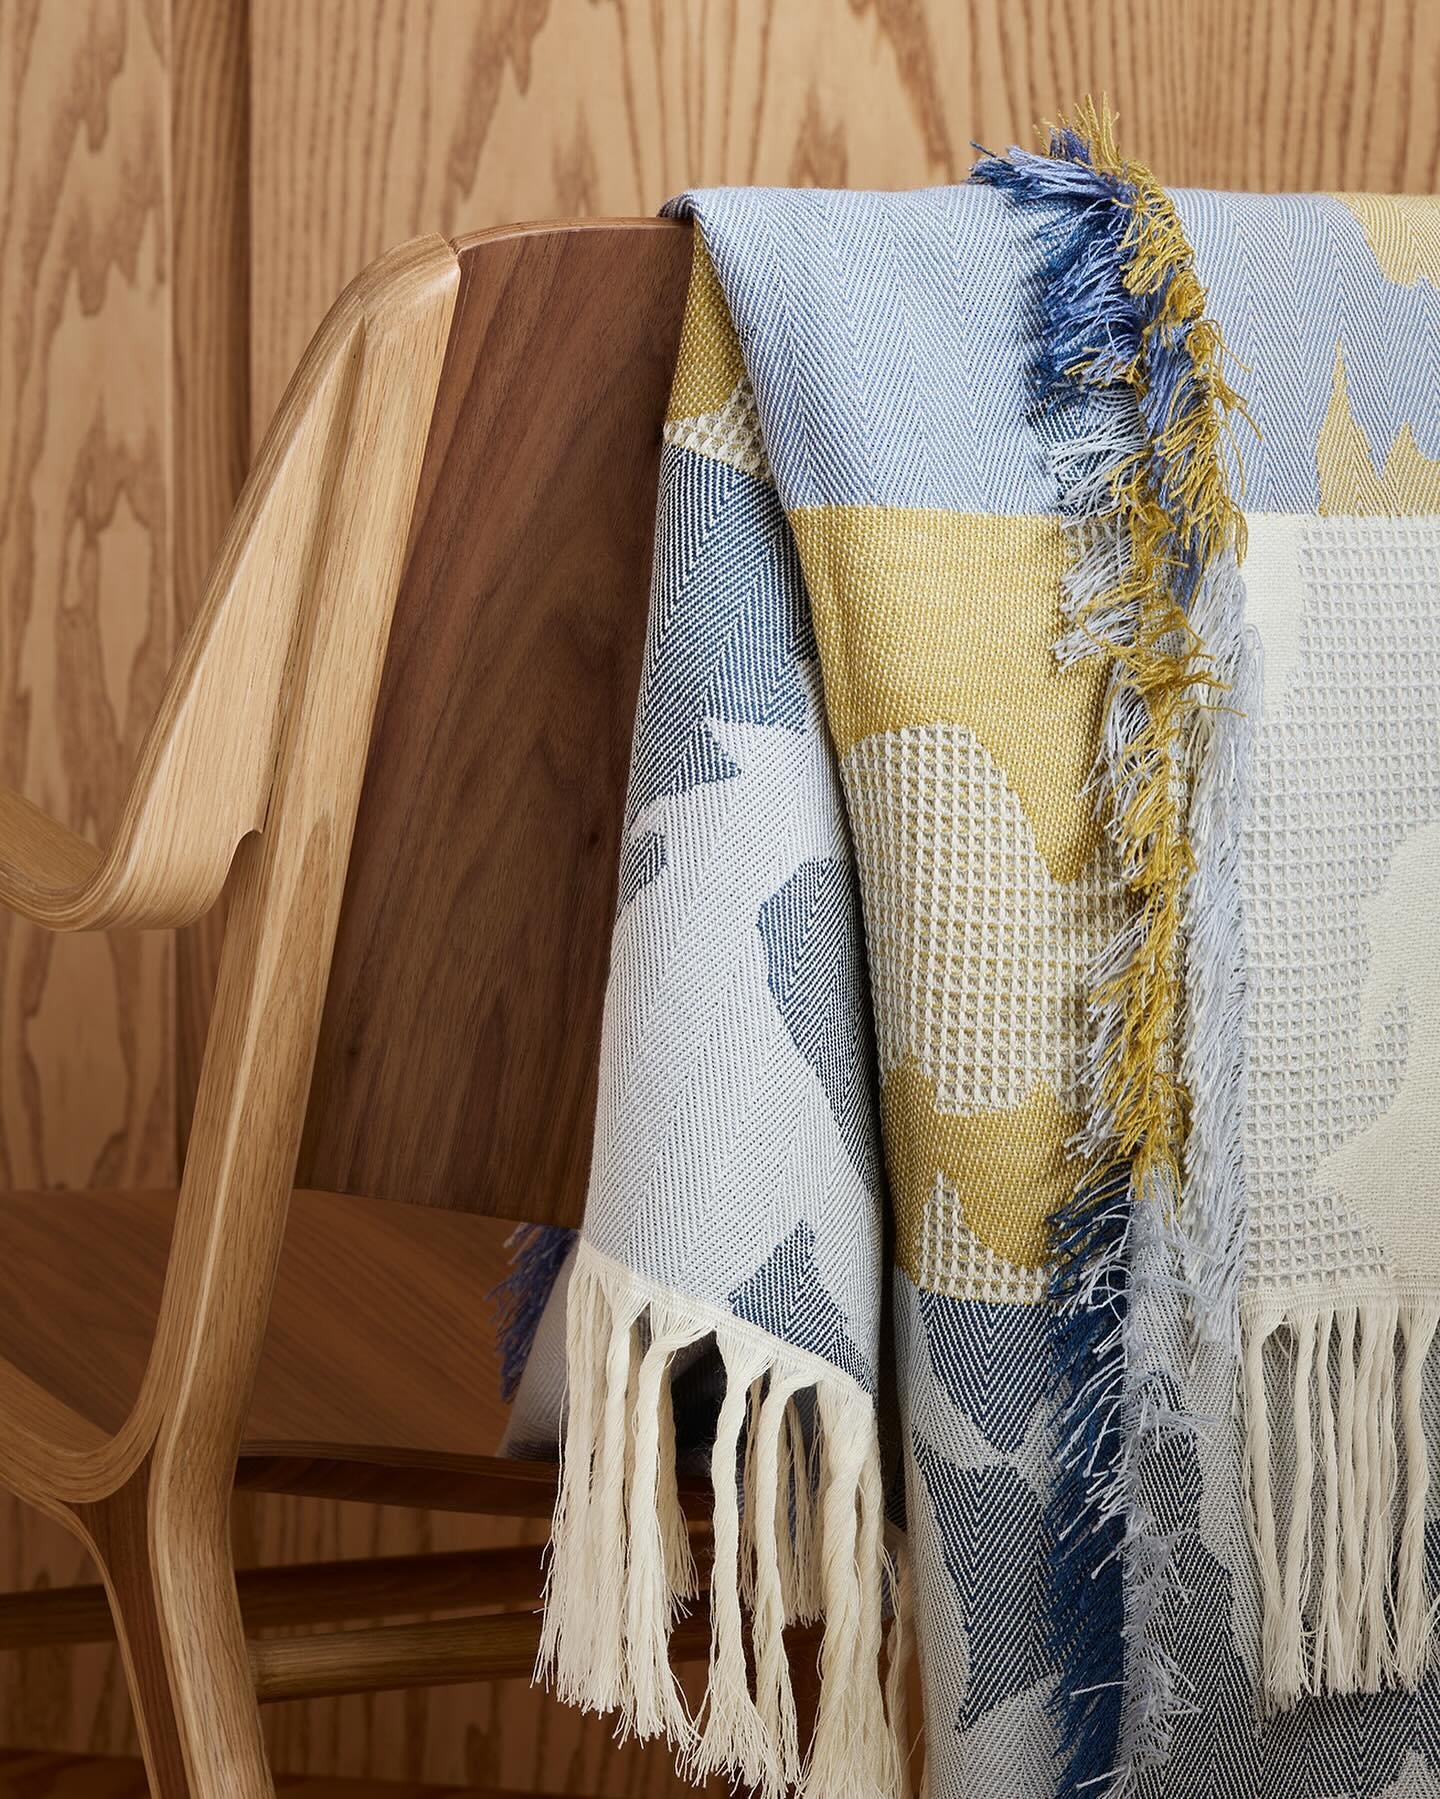 New colour 🦋💙 Tones of blue 🐬 The Heritage throw is now available in this new colour way. The tones of blue with a touch of yellow/ochre gives a hit of ocean, blue sky and summer. ☀️🌊
This is a lovely wool throw perfect for summer evenings or chi